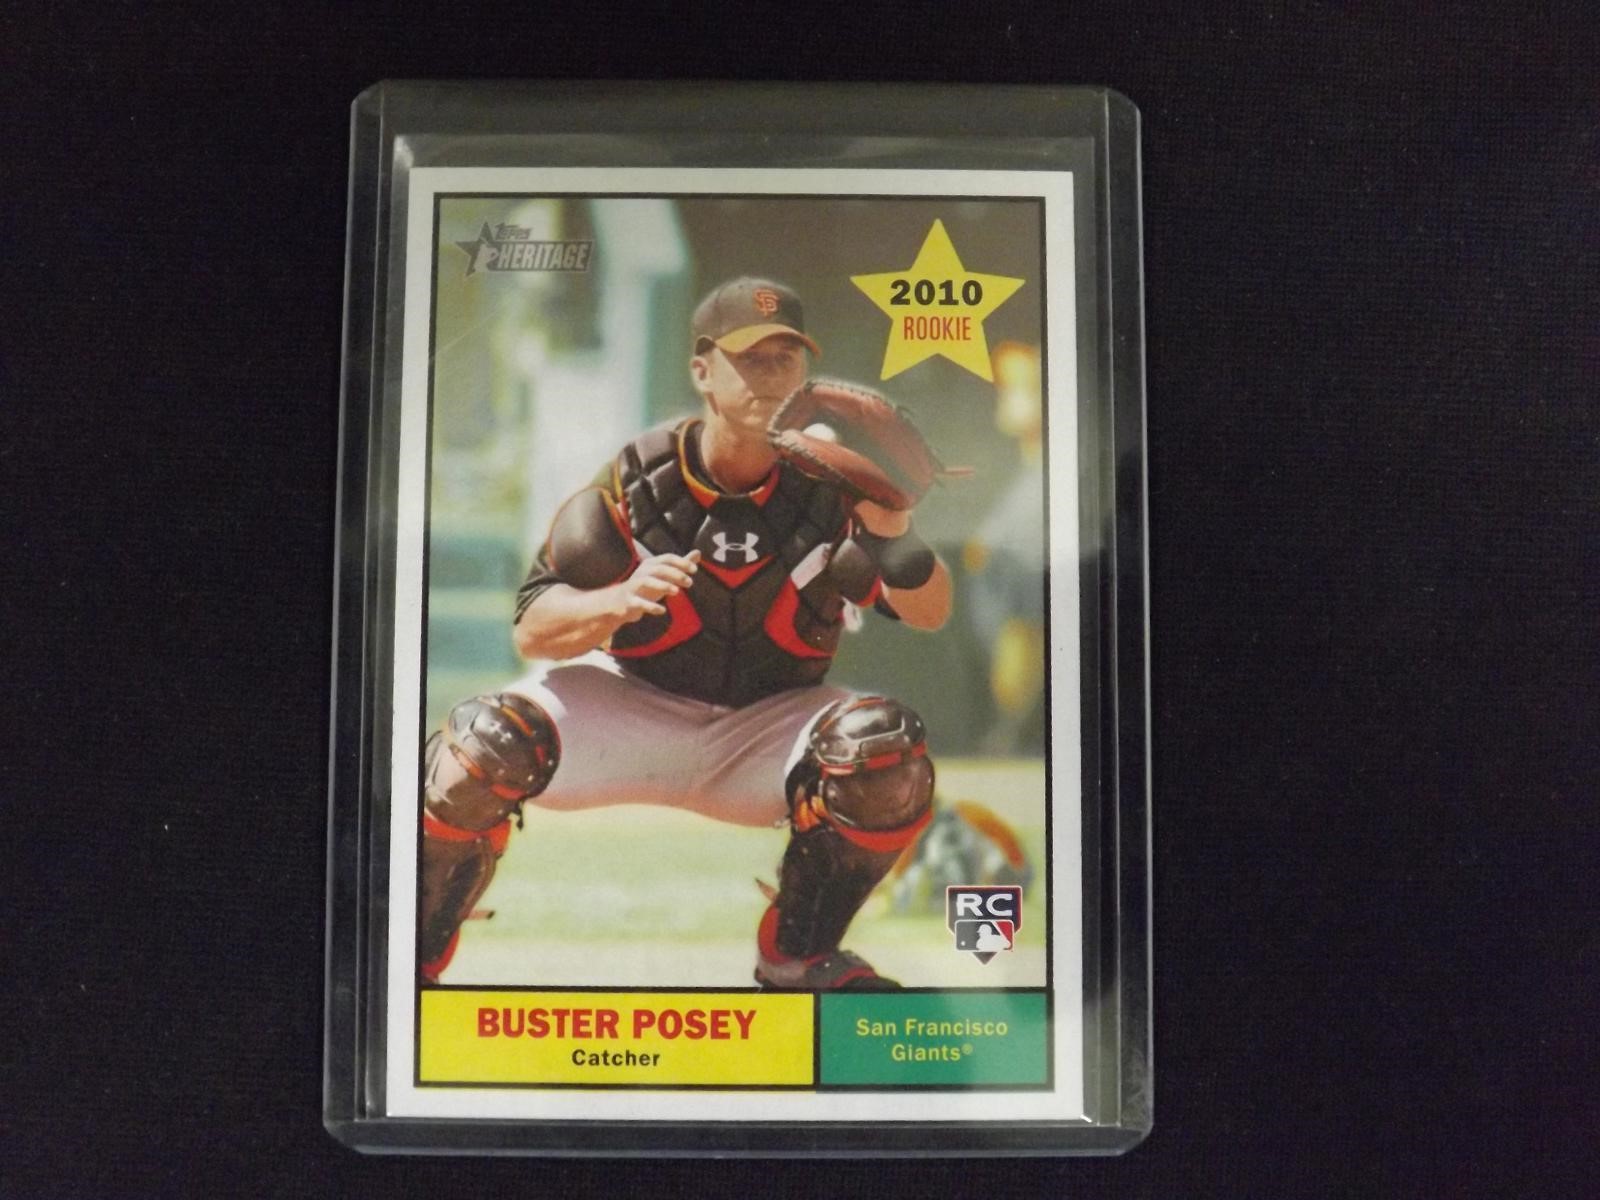 2010 TOPPS HERITAGE BUSTER POSEY ROOKIE CARD